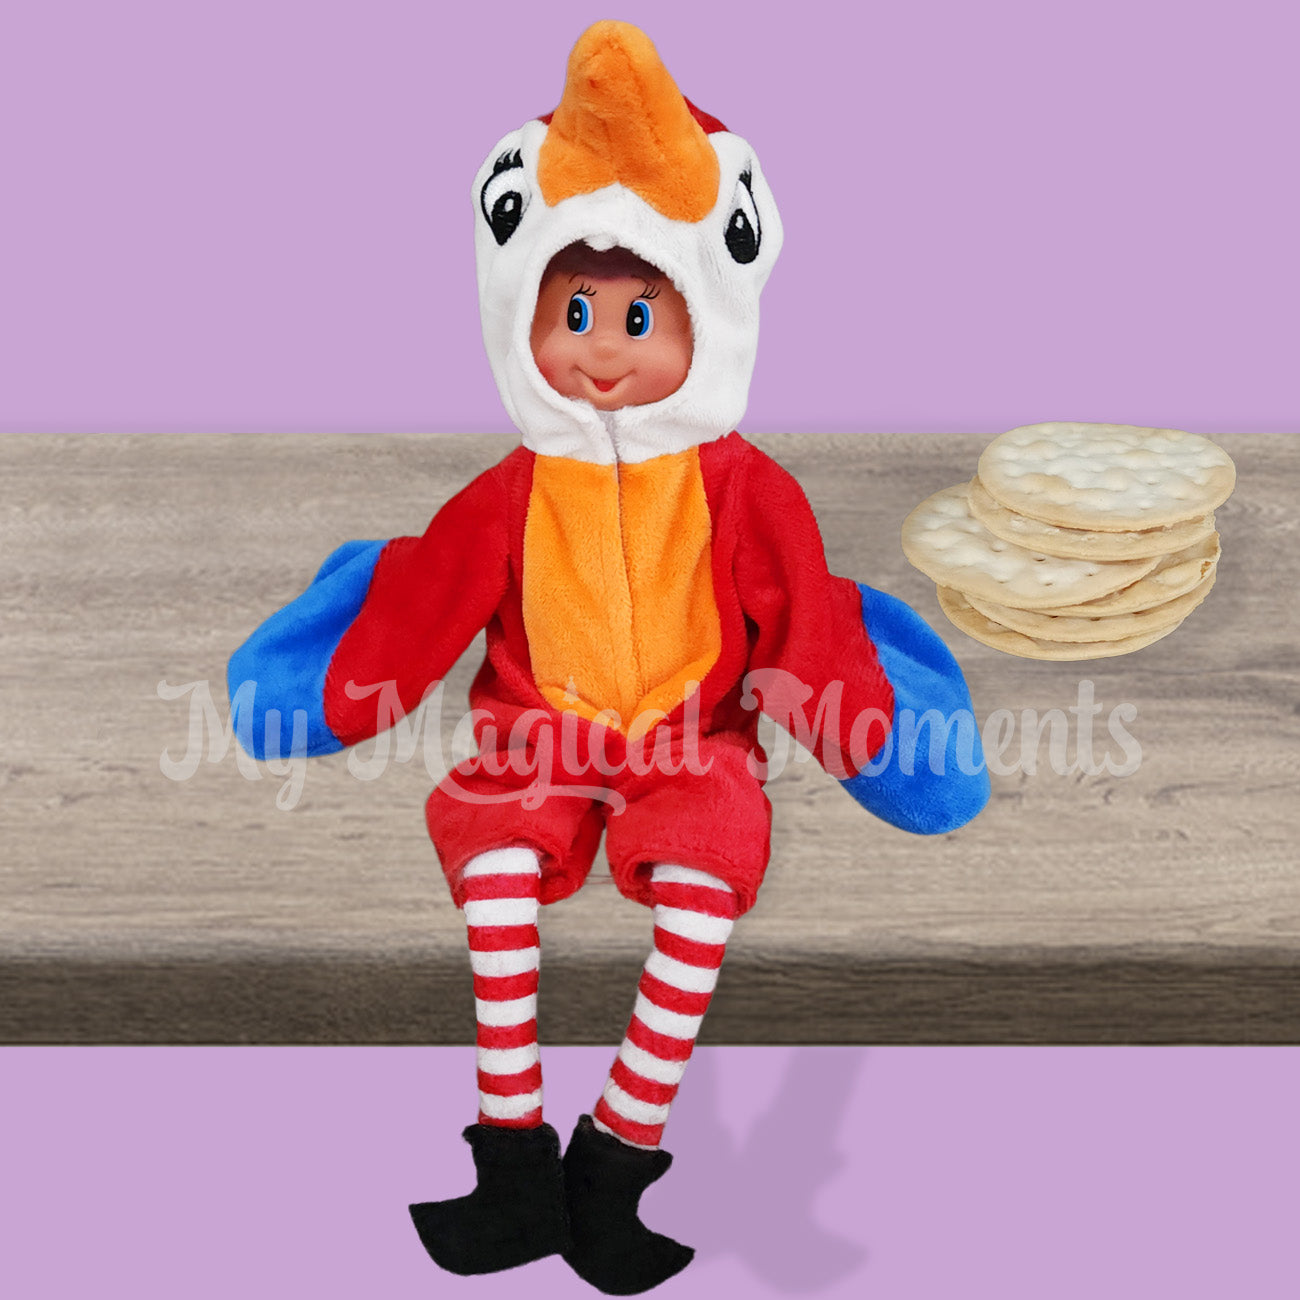 Elf dressed as a parrot on a shelf with crackers